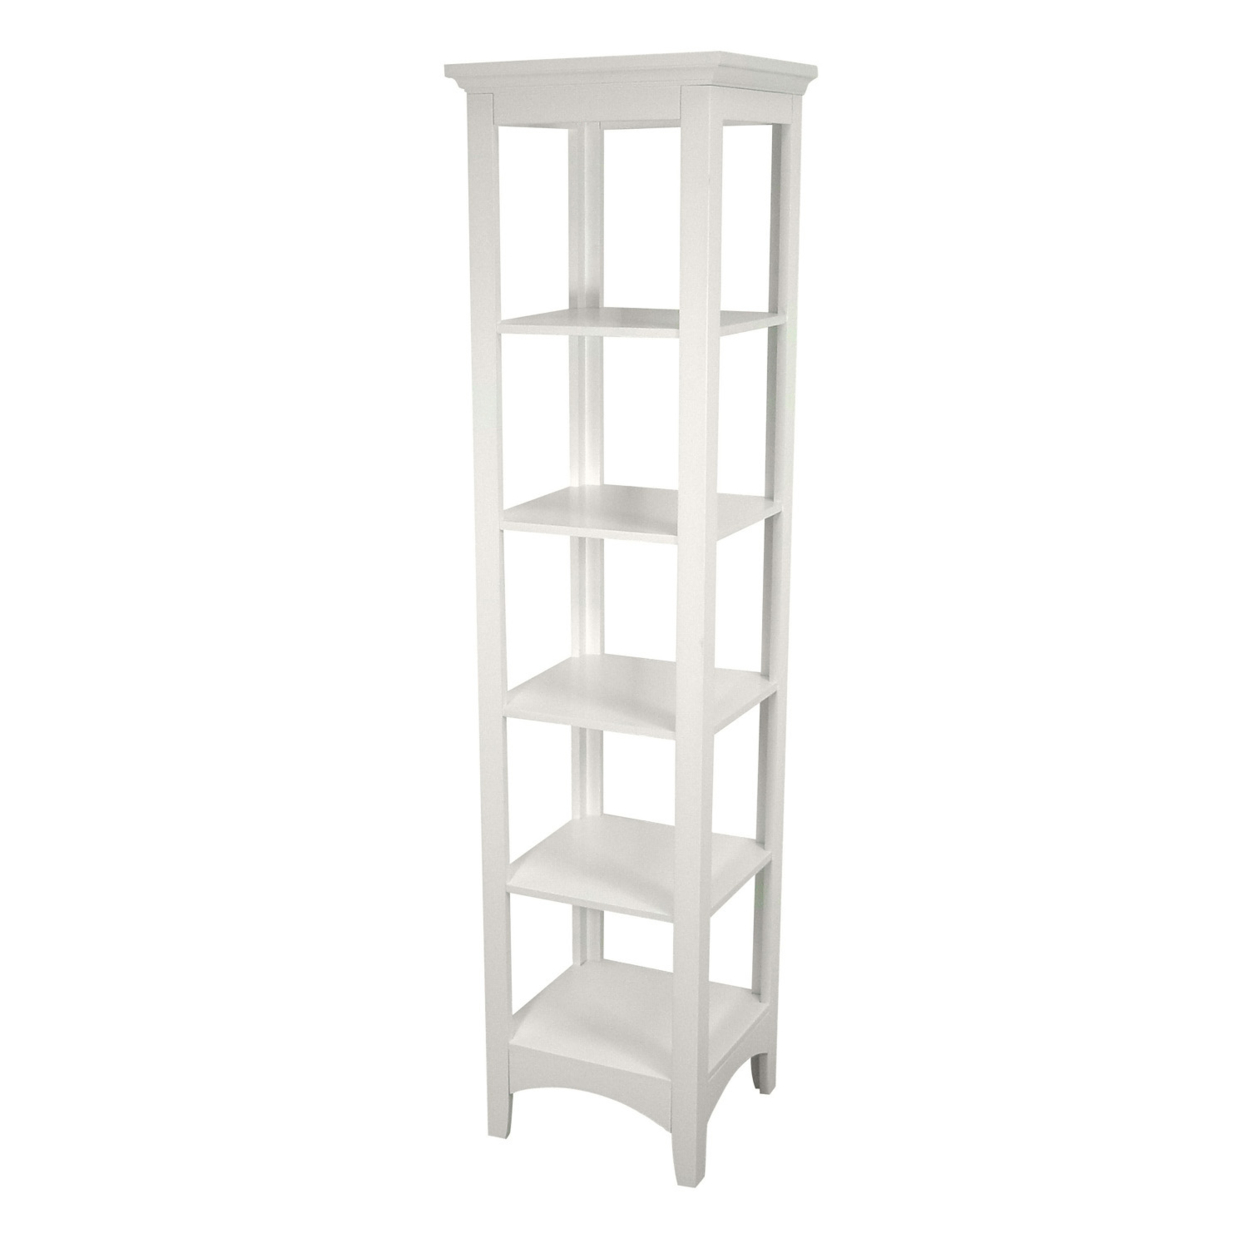 Elegant Home Fashions Wooden Bathroom Cabinet Standing White 7091